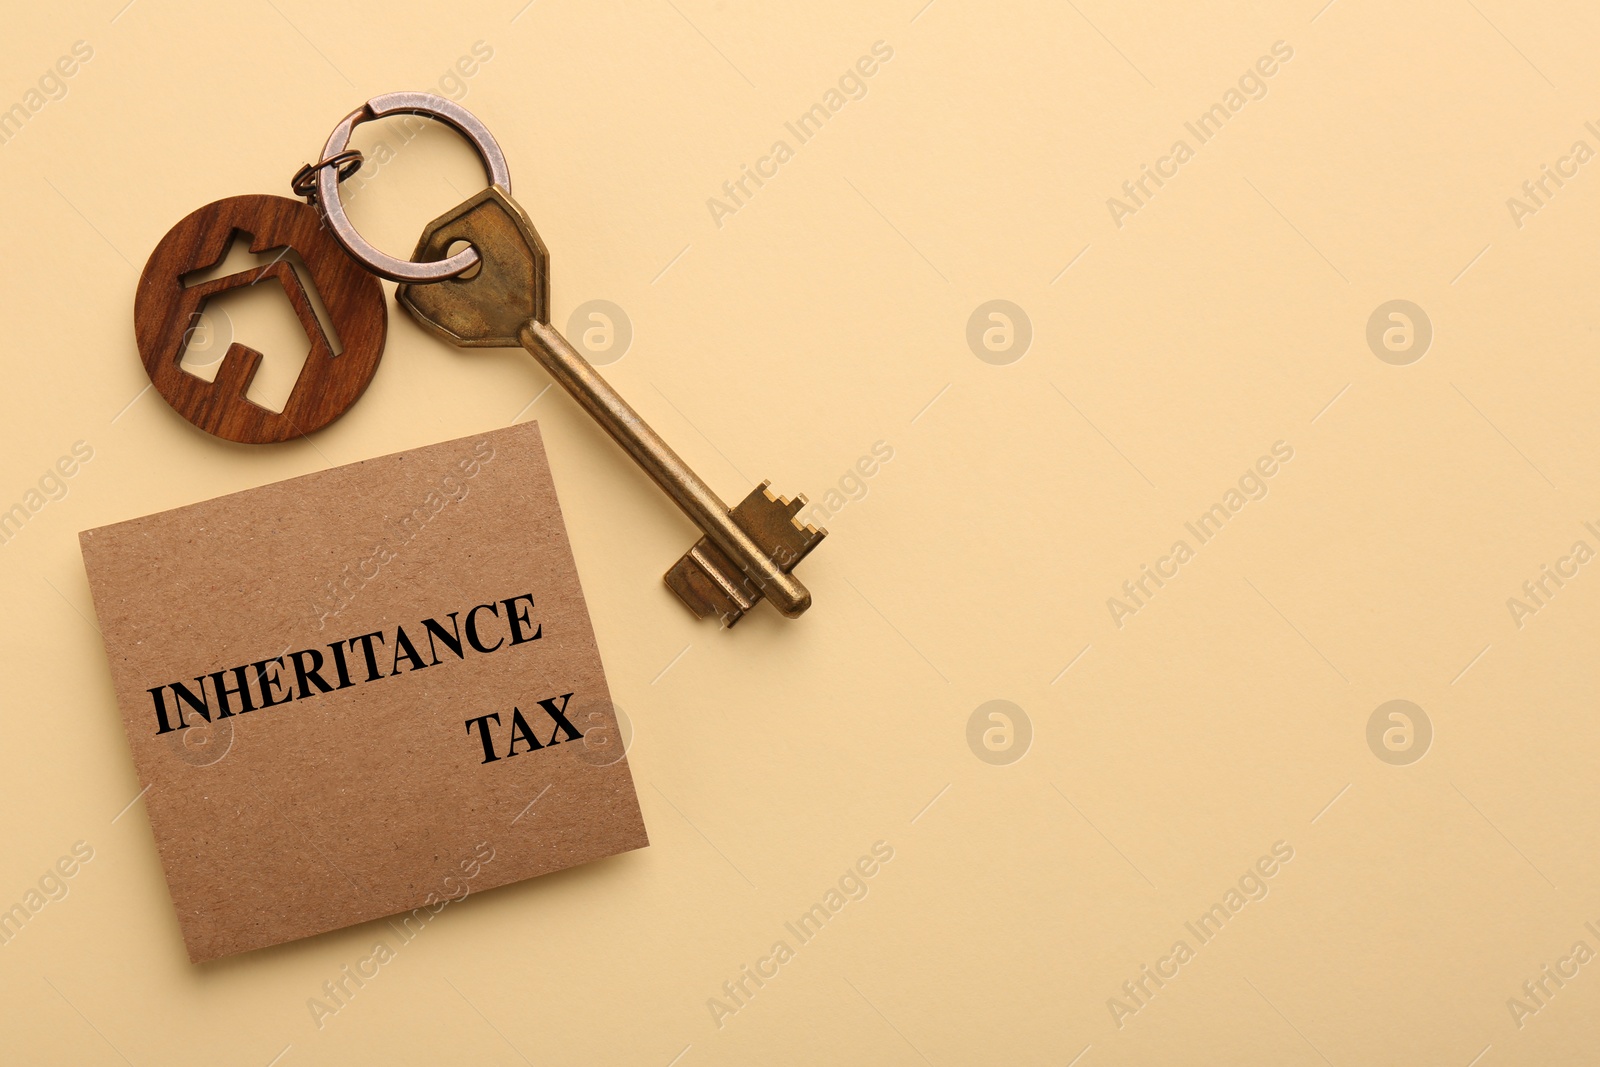 Photo of Inheritance Tax. Card and key with key chain in shape of house on beige background, top view. Space for text